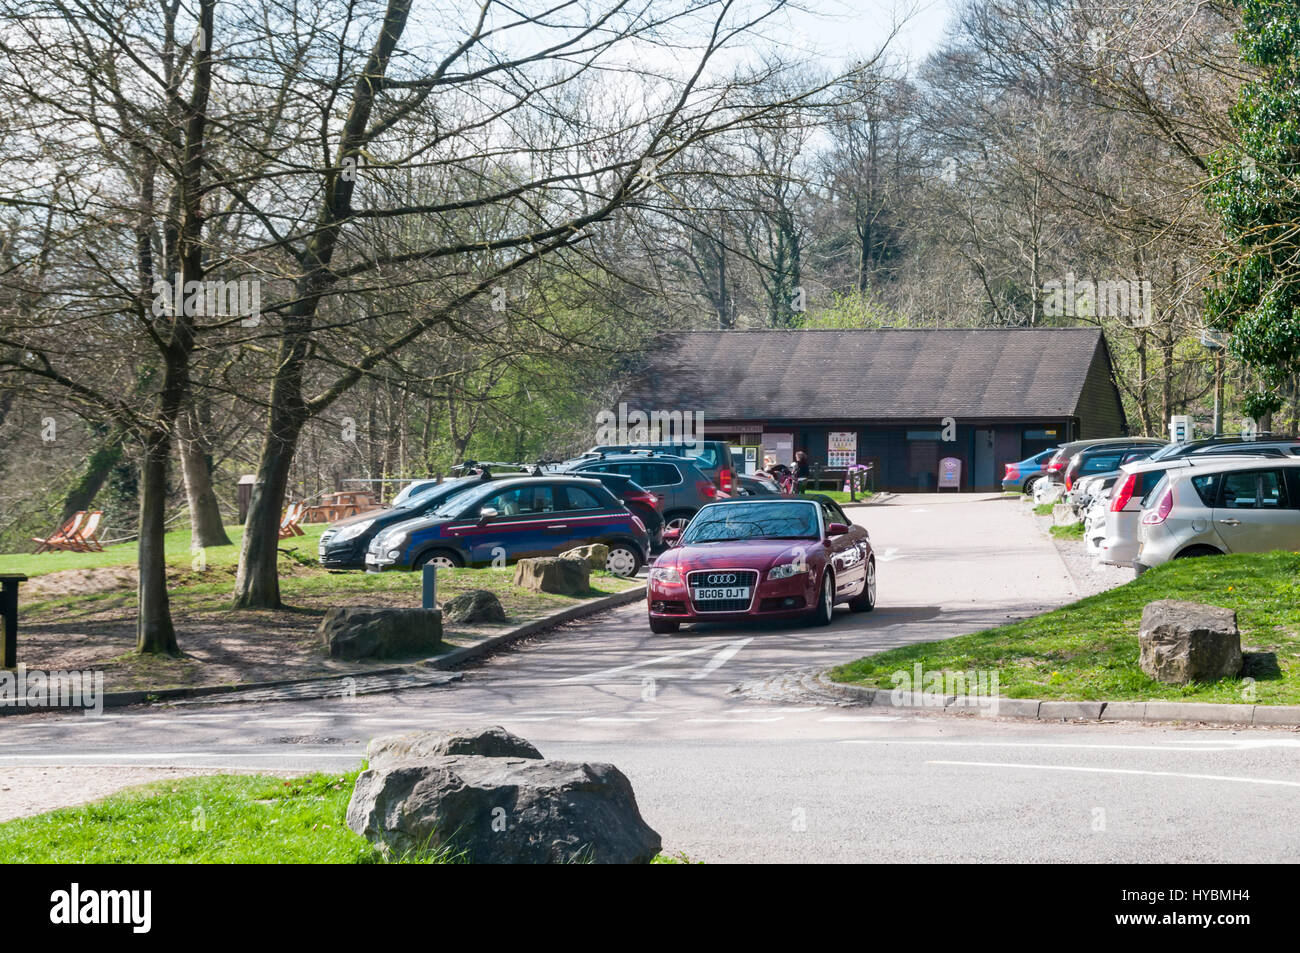 Junction 8 Cafe just off J8 of the M25 motorway, on Reigate Hill, Surrey. Stock Photo